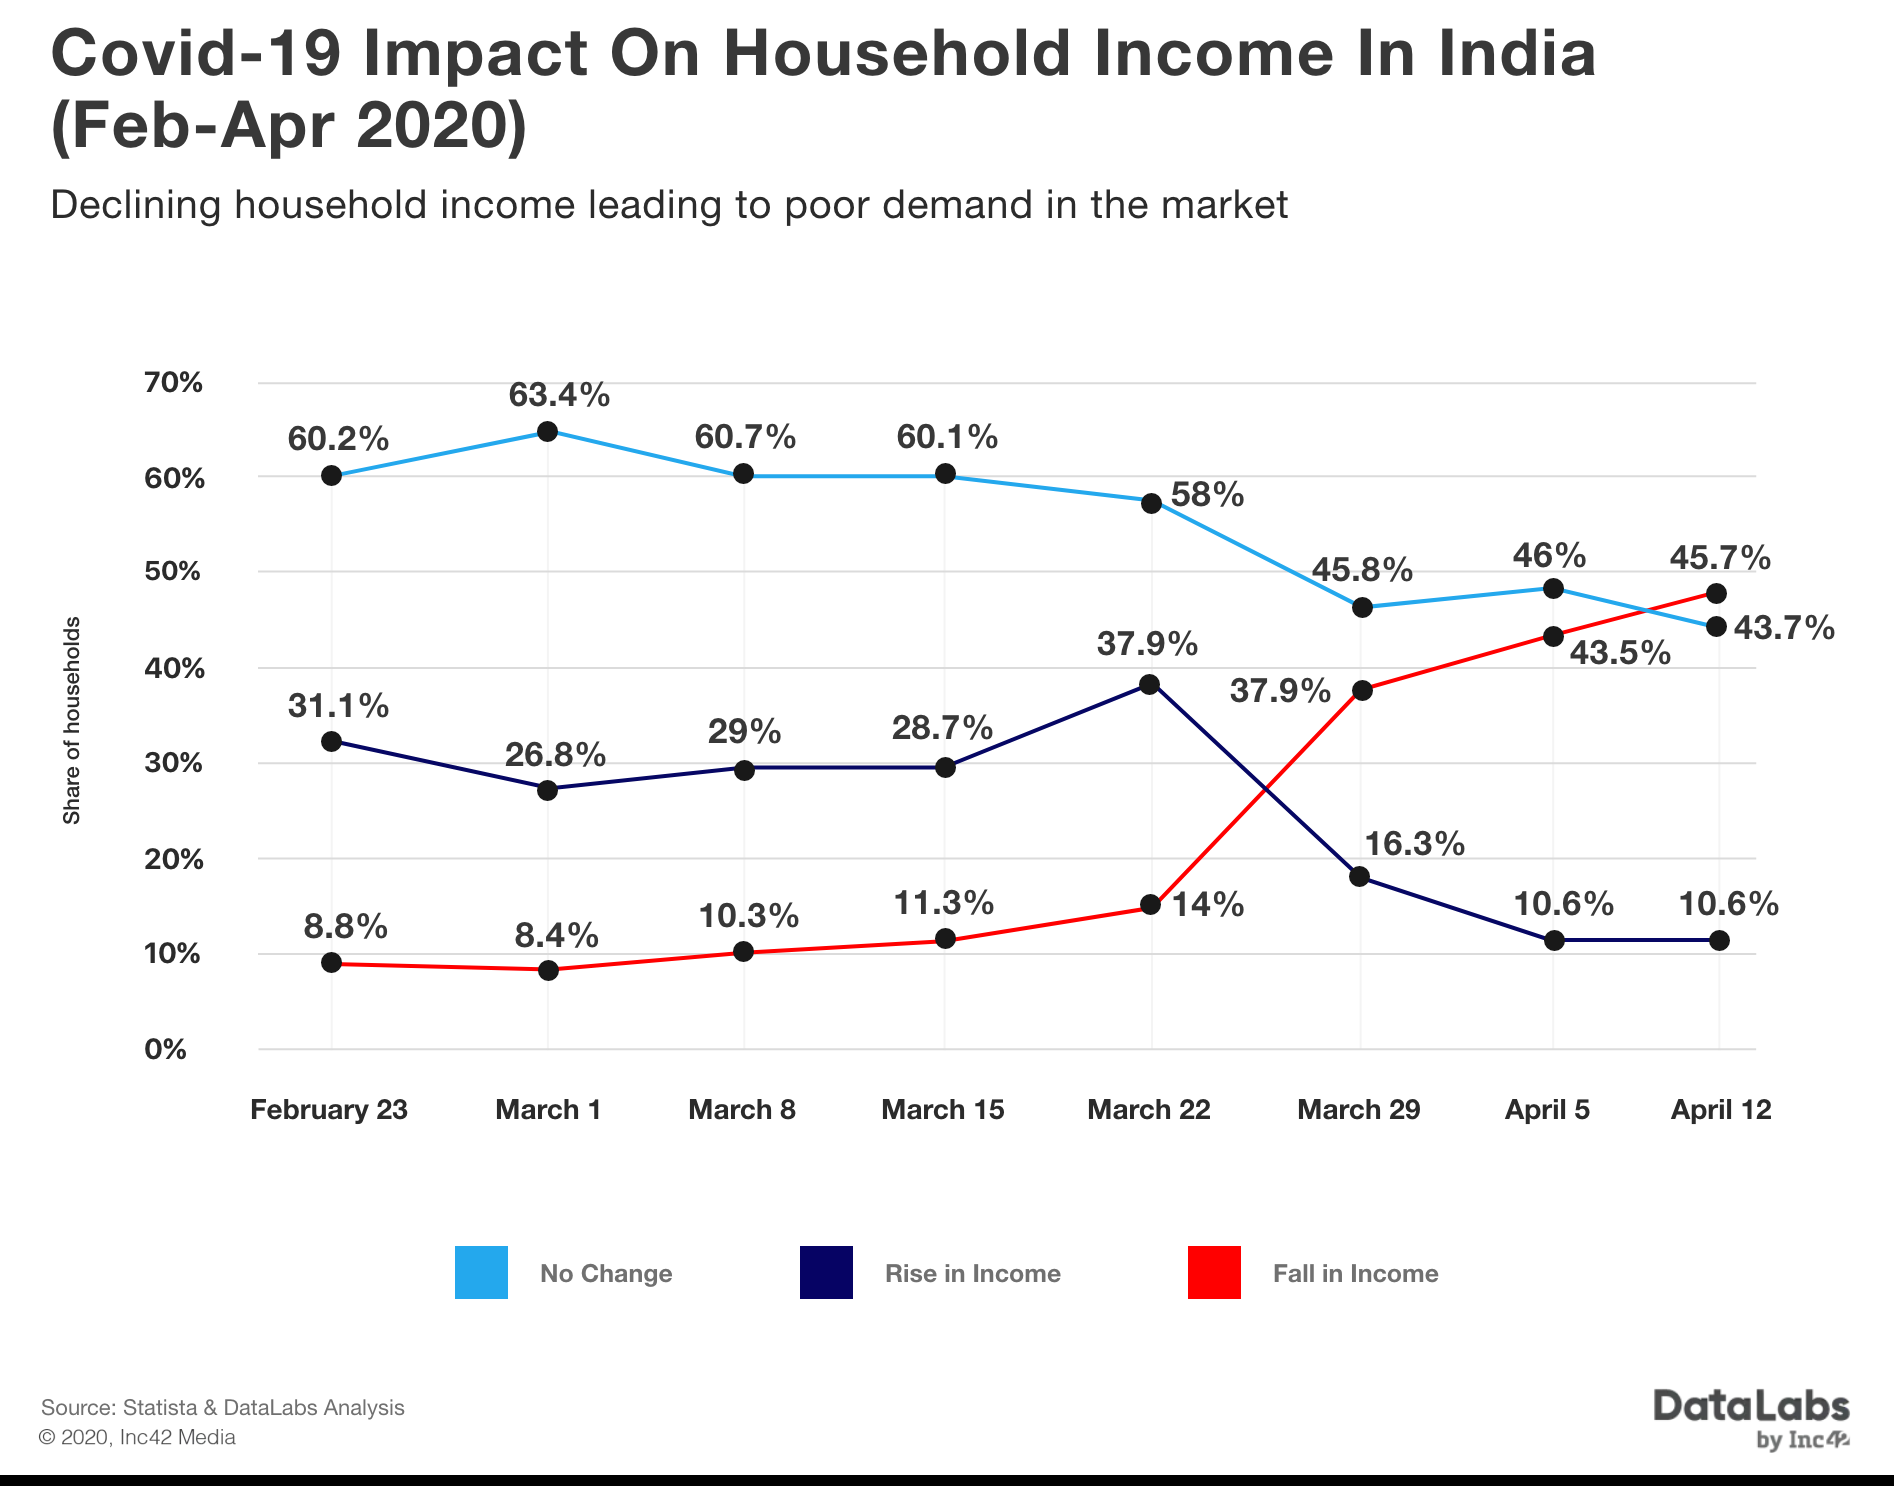 Declining household income leading to poor demand in the market